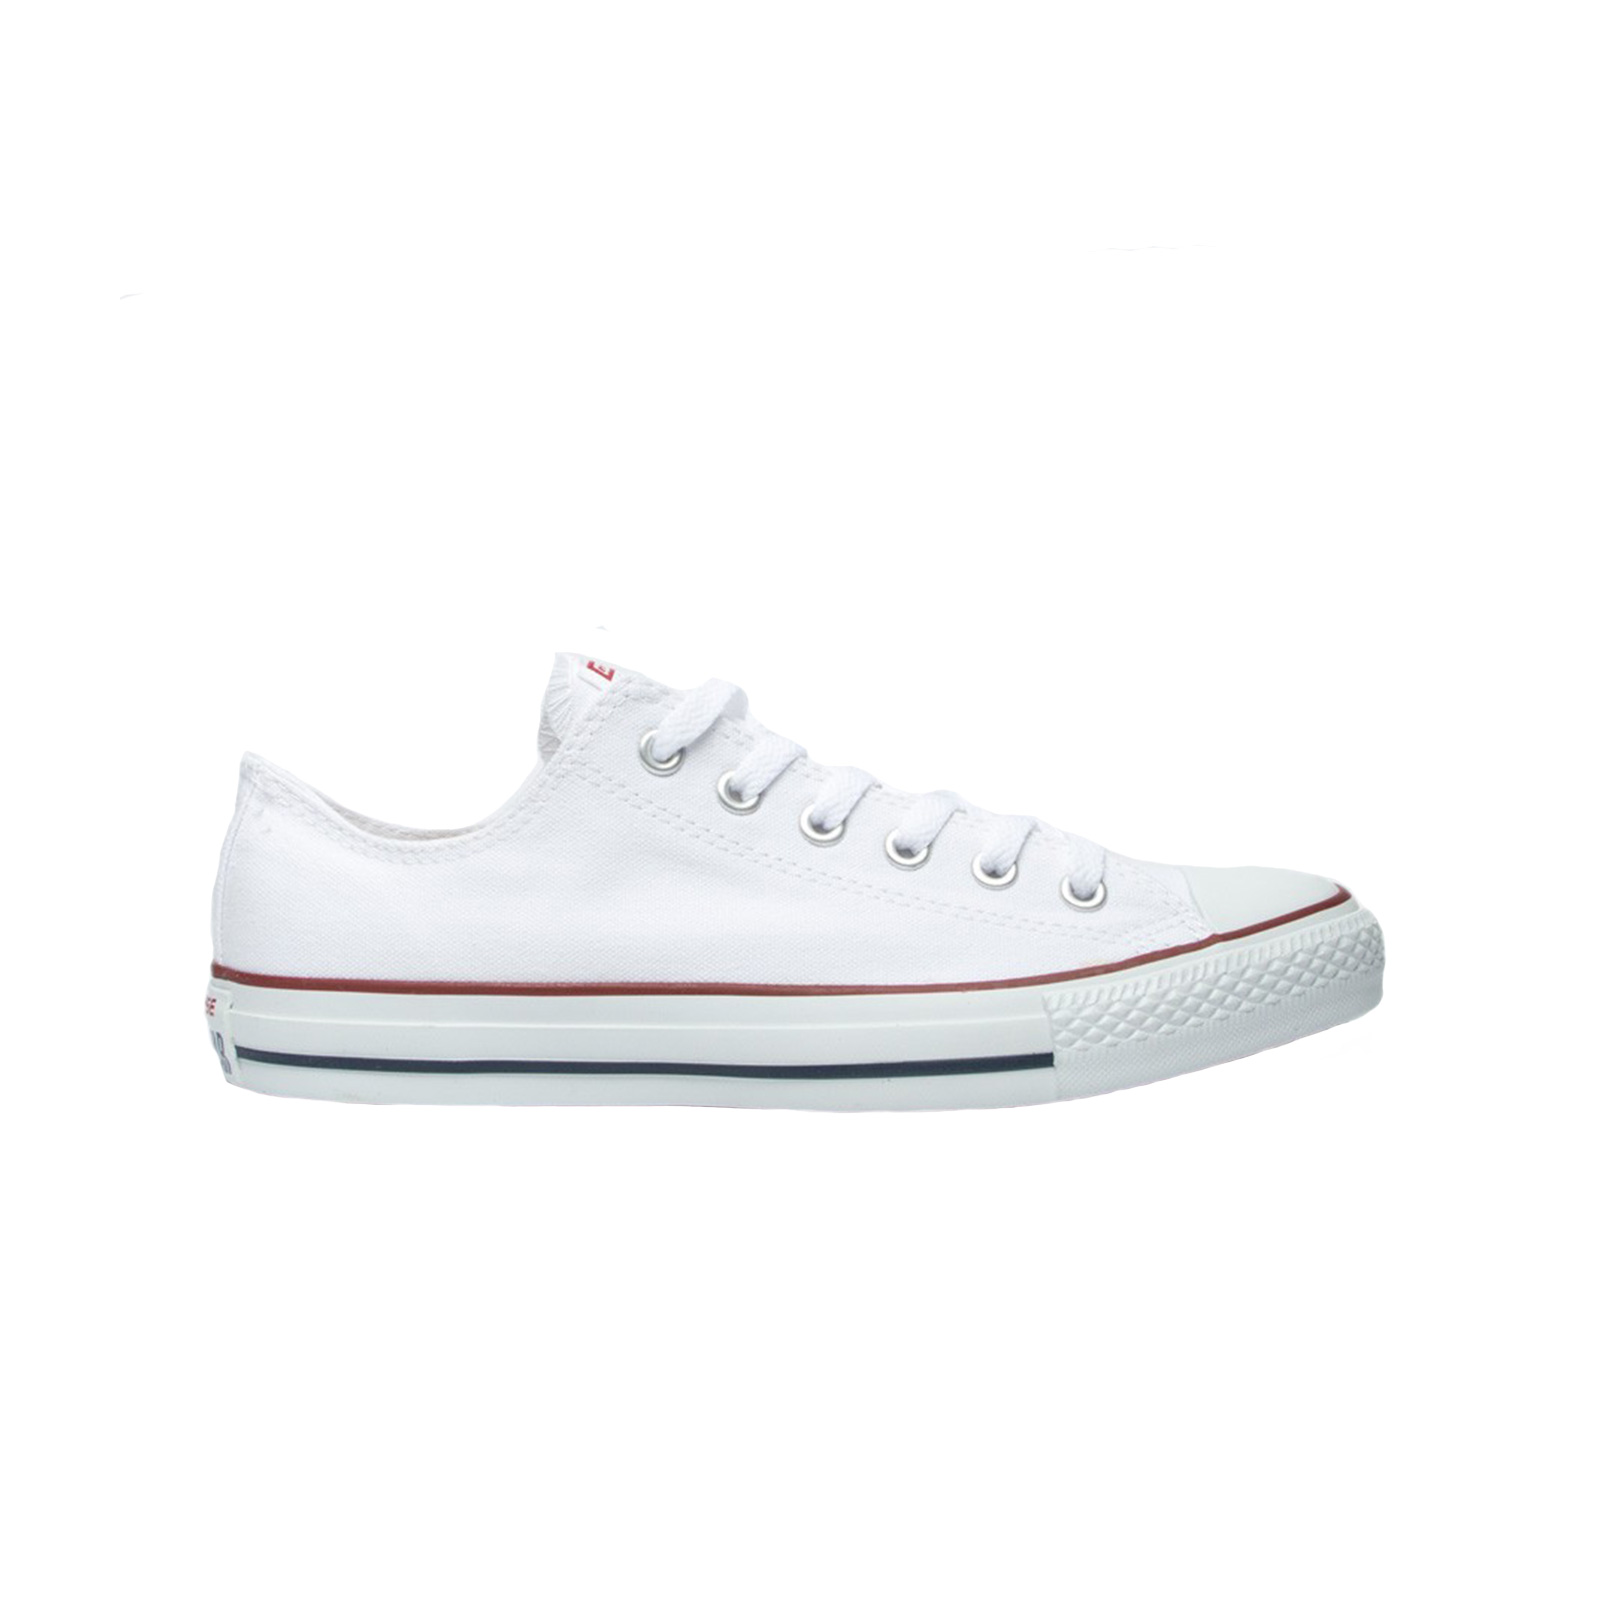 Converse - CHUCK TAYLOR ALL STAR - 102-OPTICAL WHITE Ανδρικά > Παπούτσια > Sneaker > Παπούτσι Low Cut